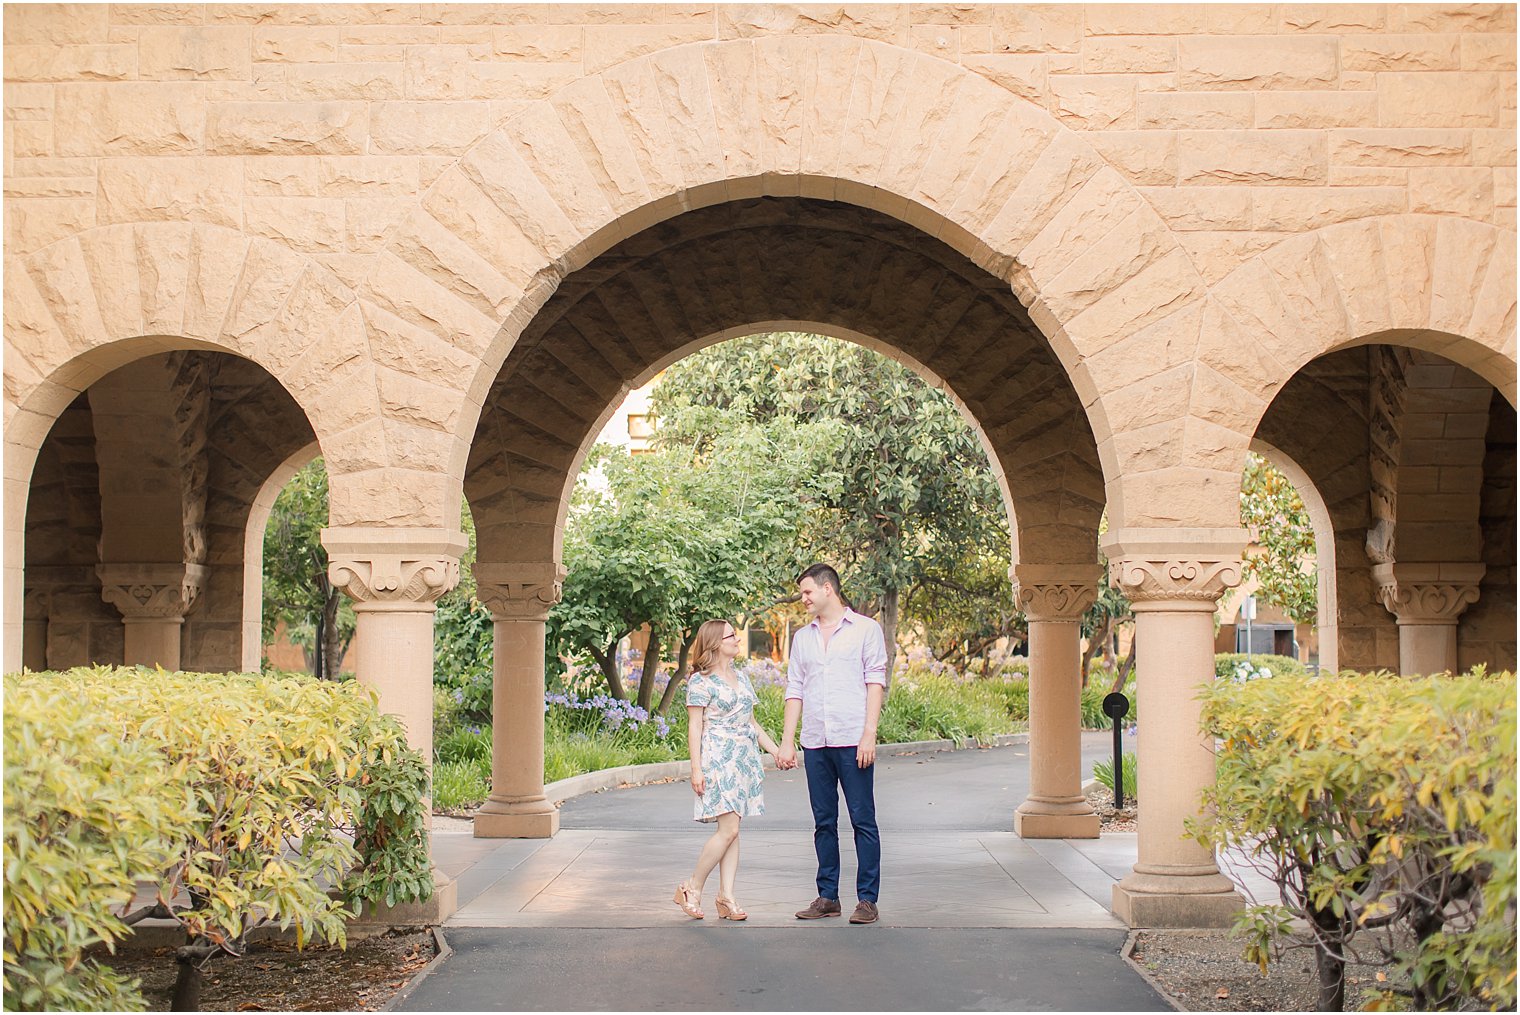 Engagement photos under an arch on Stanford campus